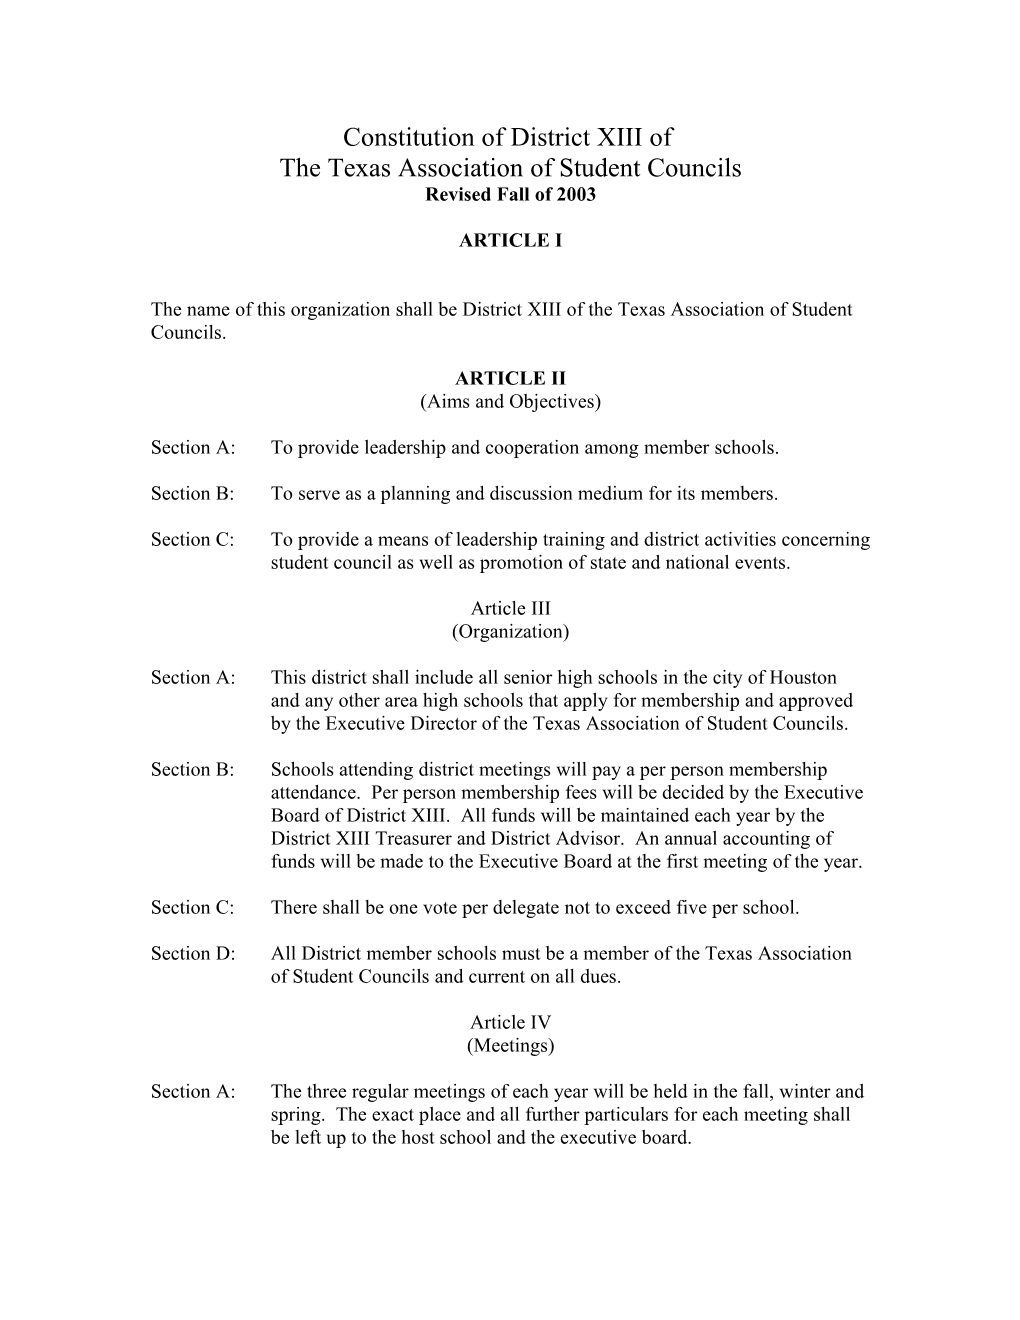 Constitution of District XIII Of